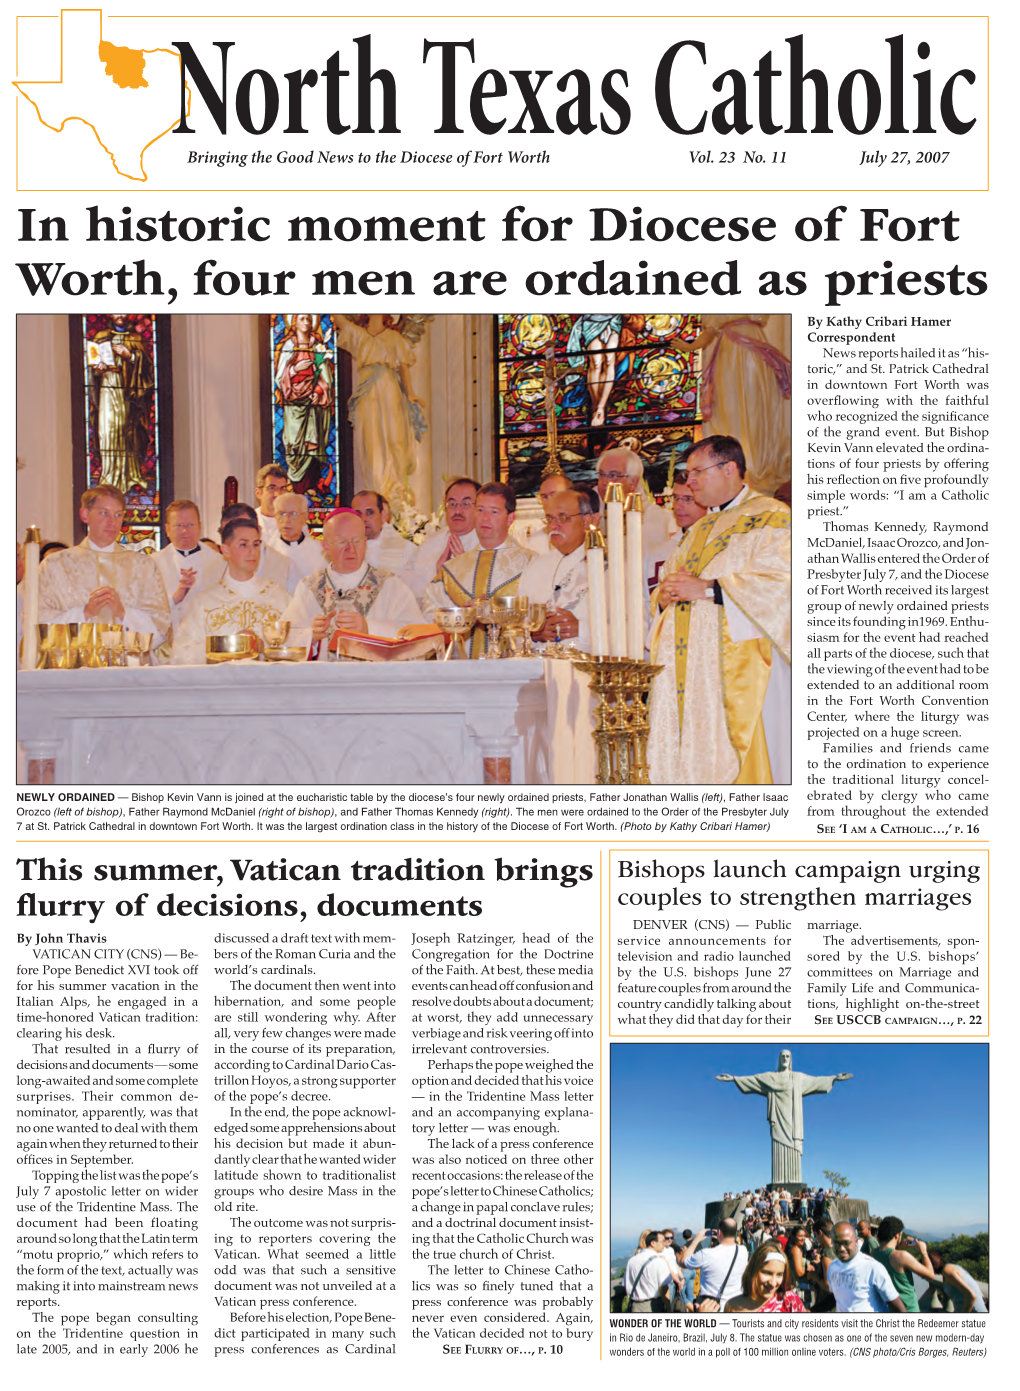 In Historic Moment for Diocese of Fort Worth, Four Men Are Ordained As Priests by Kathy Cribari Hamer Correspondent News Reports Hailed It As “His- Toric,” and St